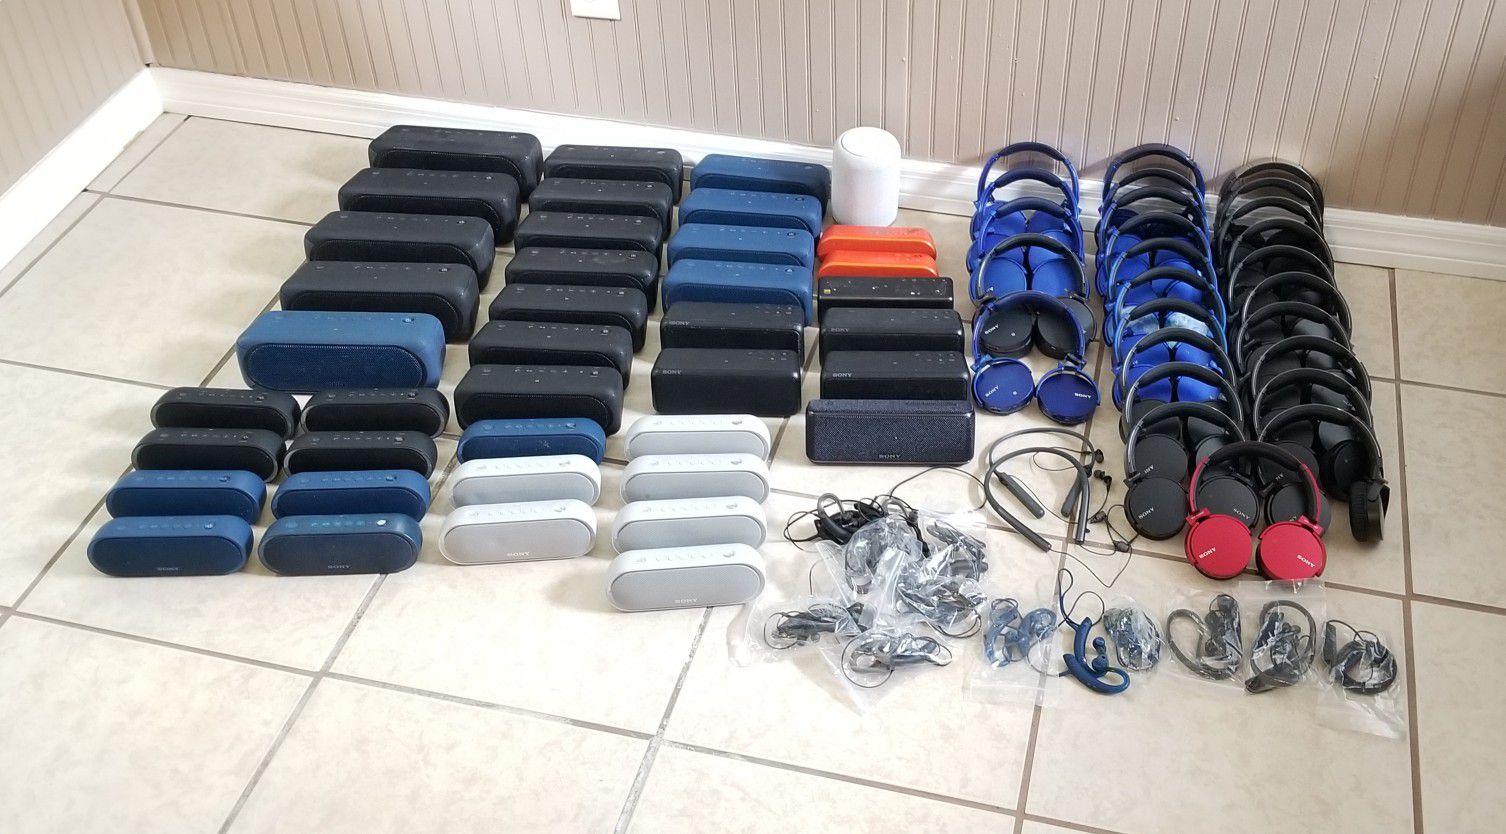 Sony Bluetooth Speaker & Headphone For Parts or Repair Lot - 86 Pieces